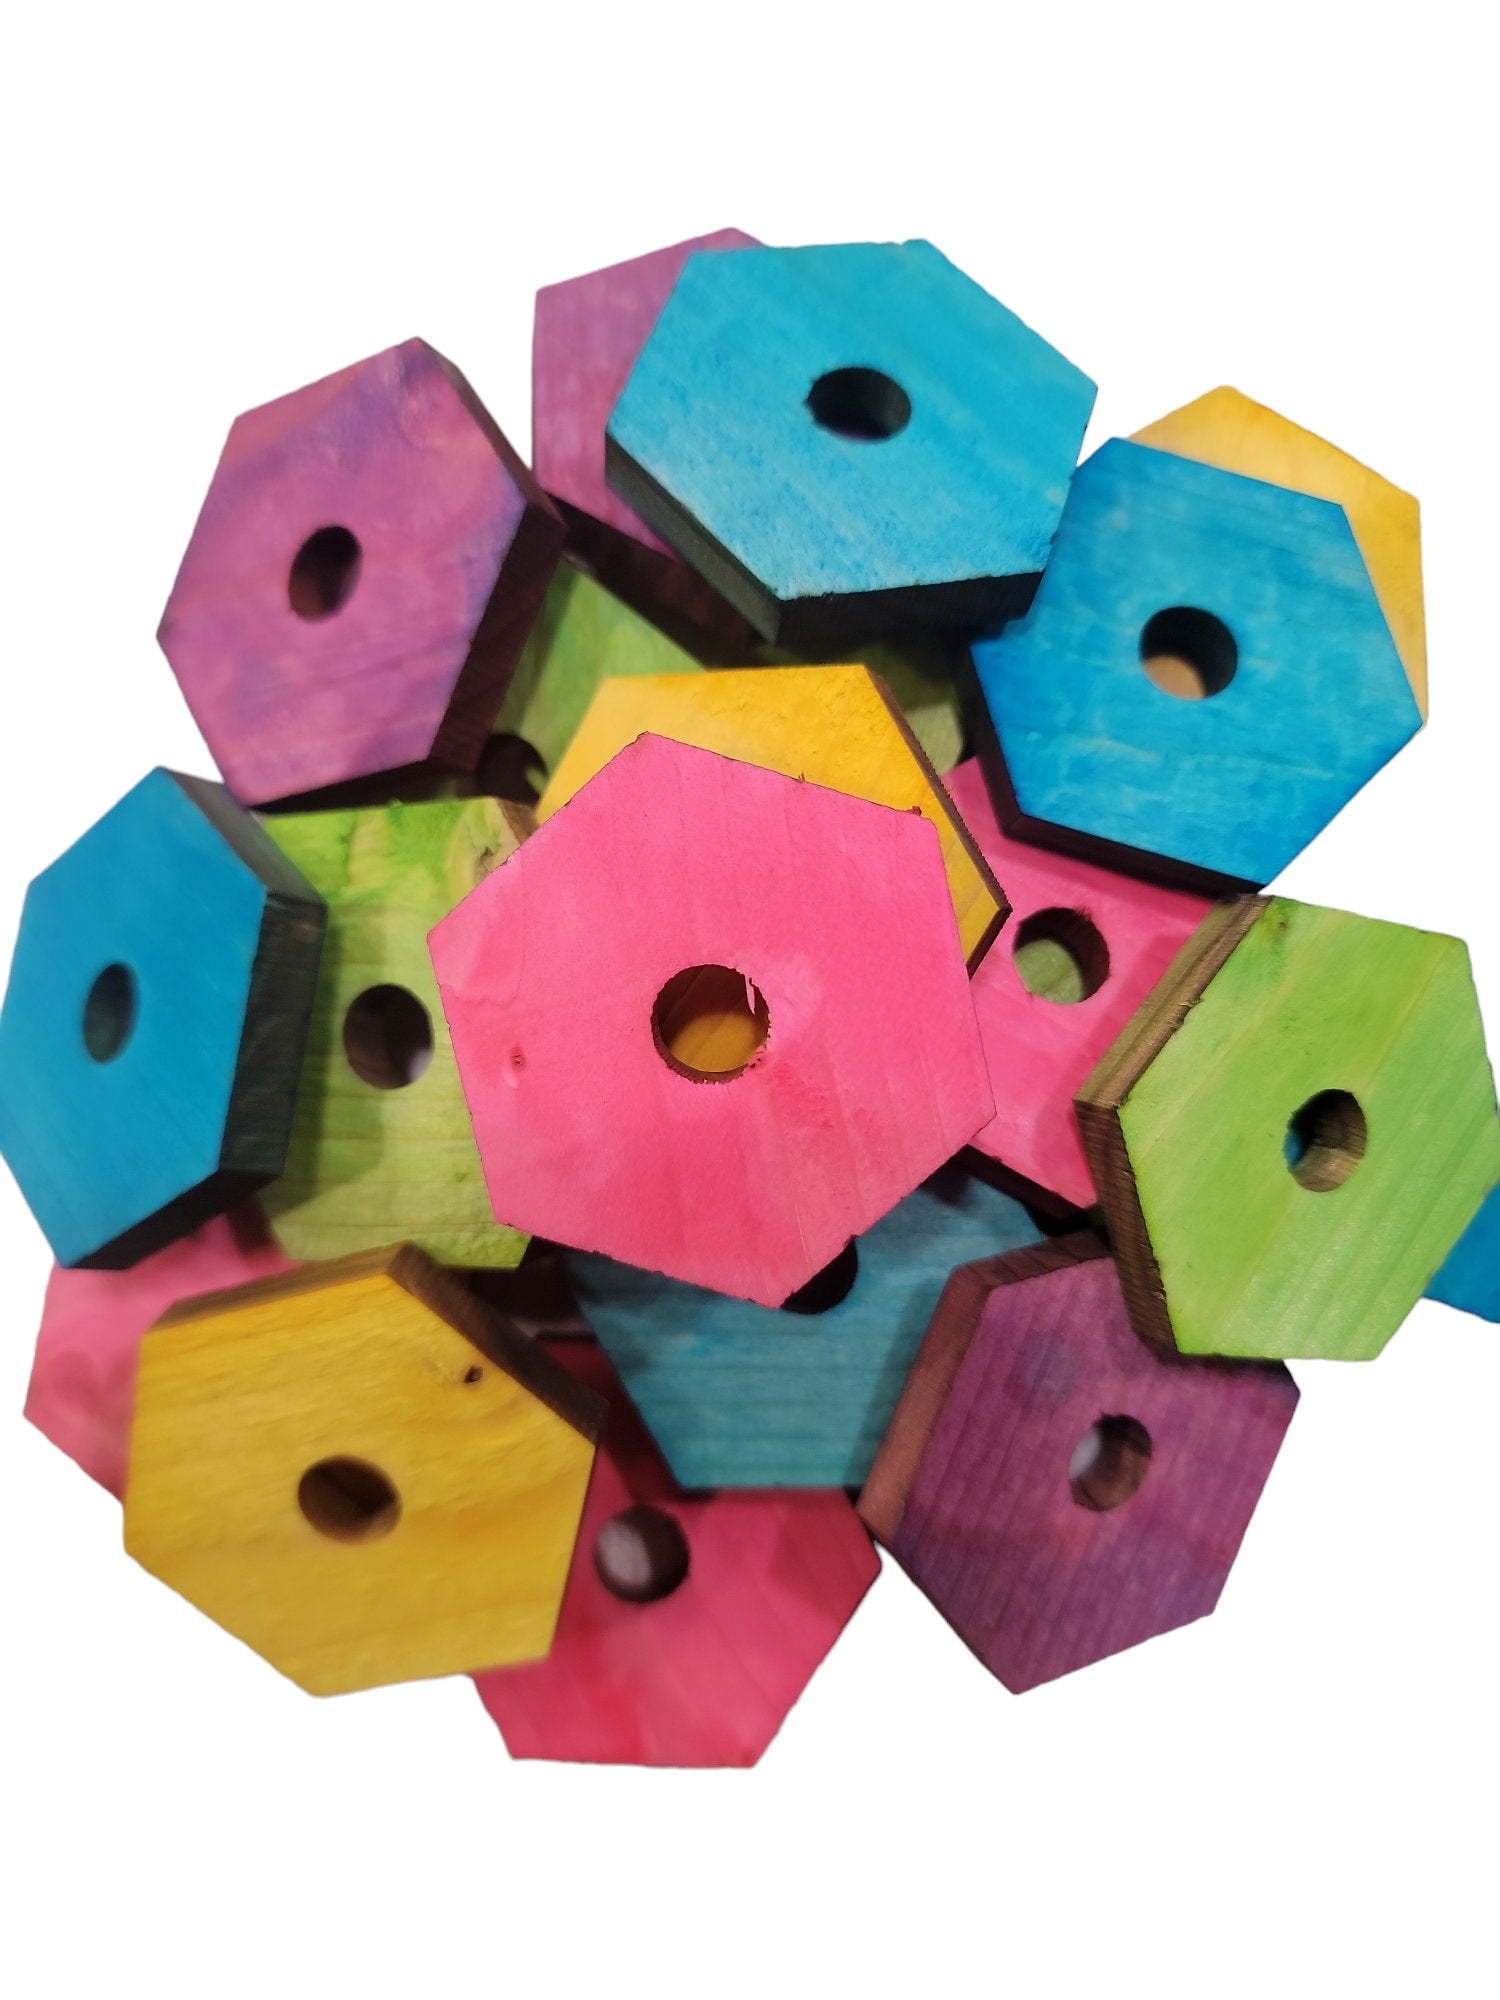 Colorful Pine Hexagons - 25 Pack - Talon Toy for Parrots, Bird Toy Parts